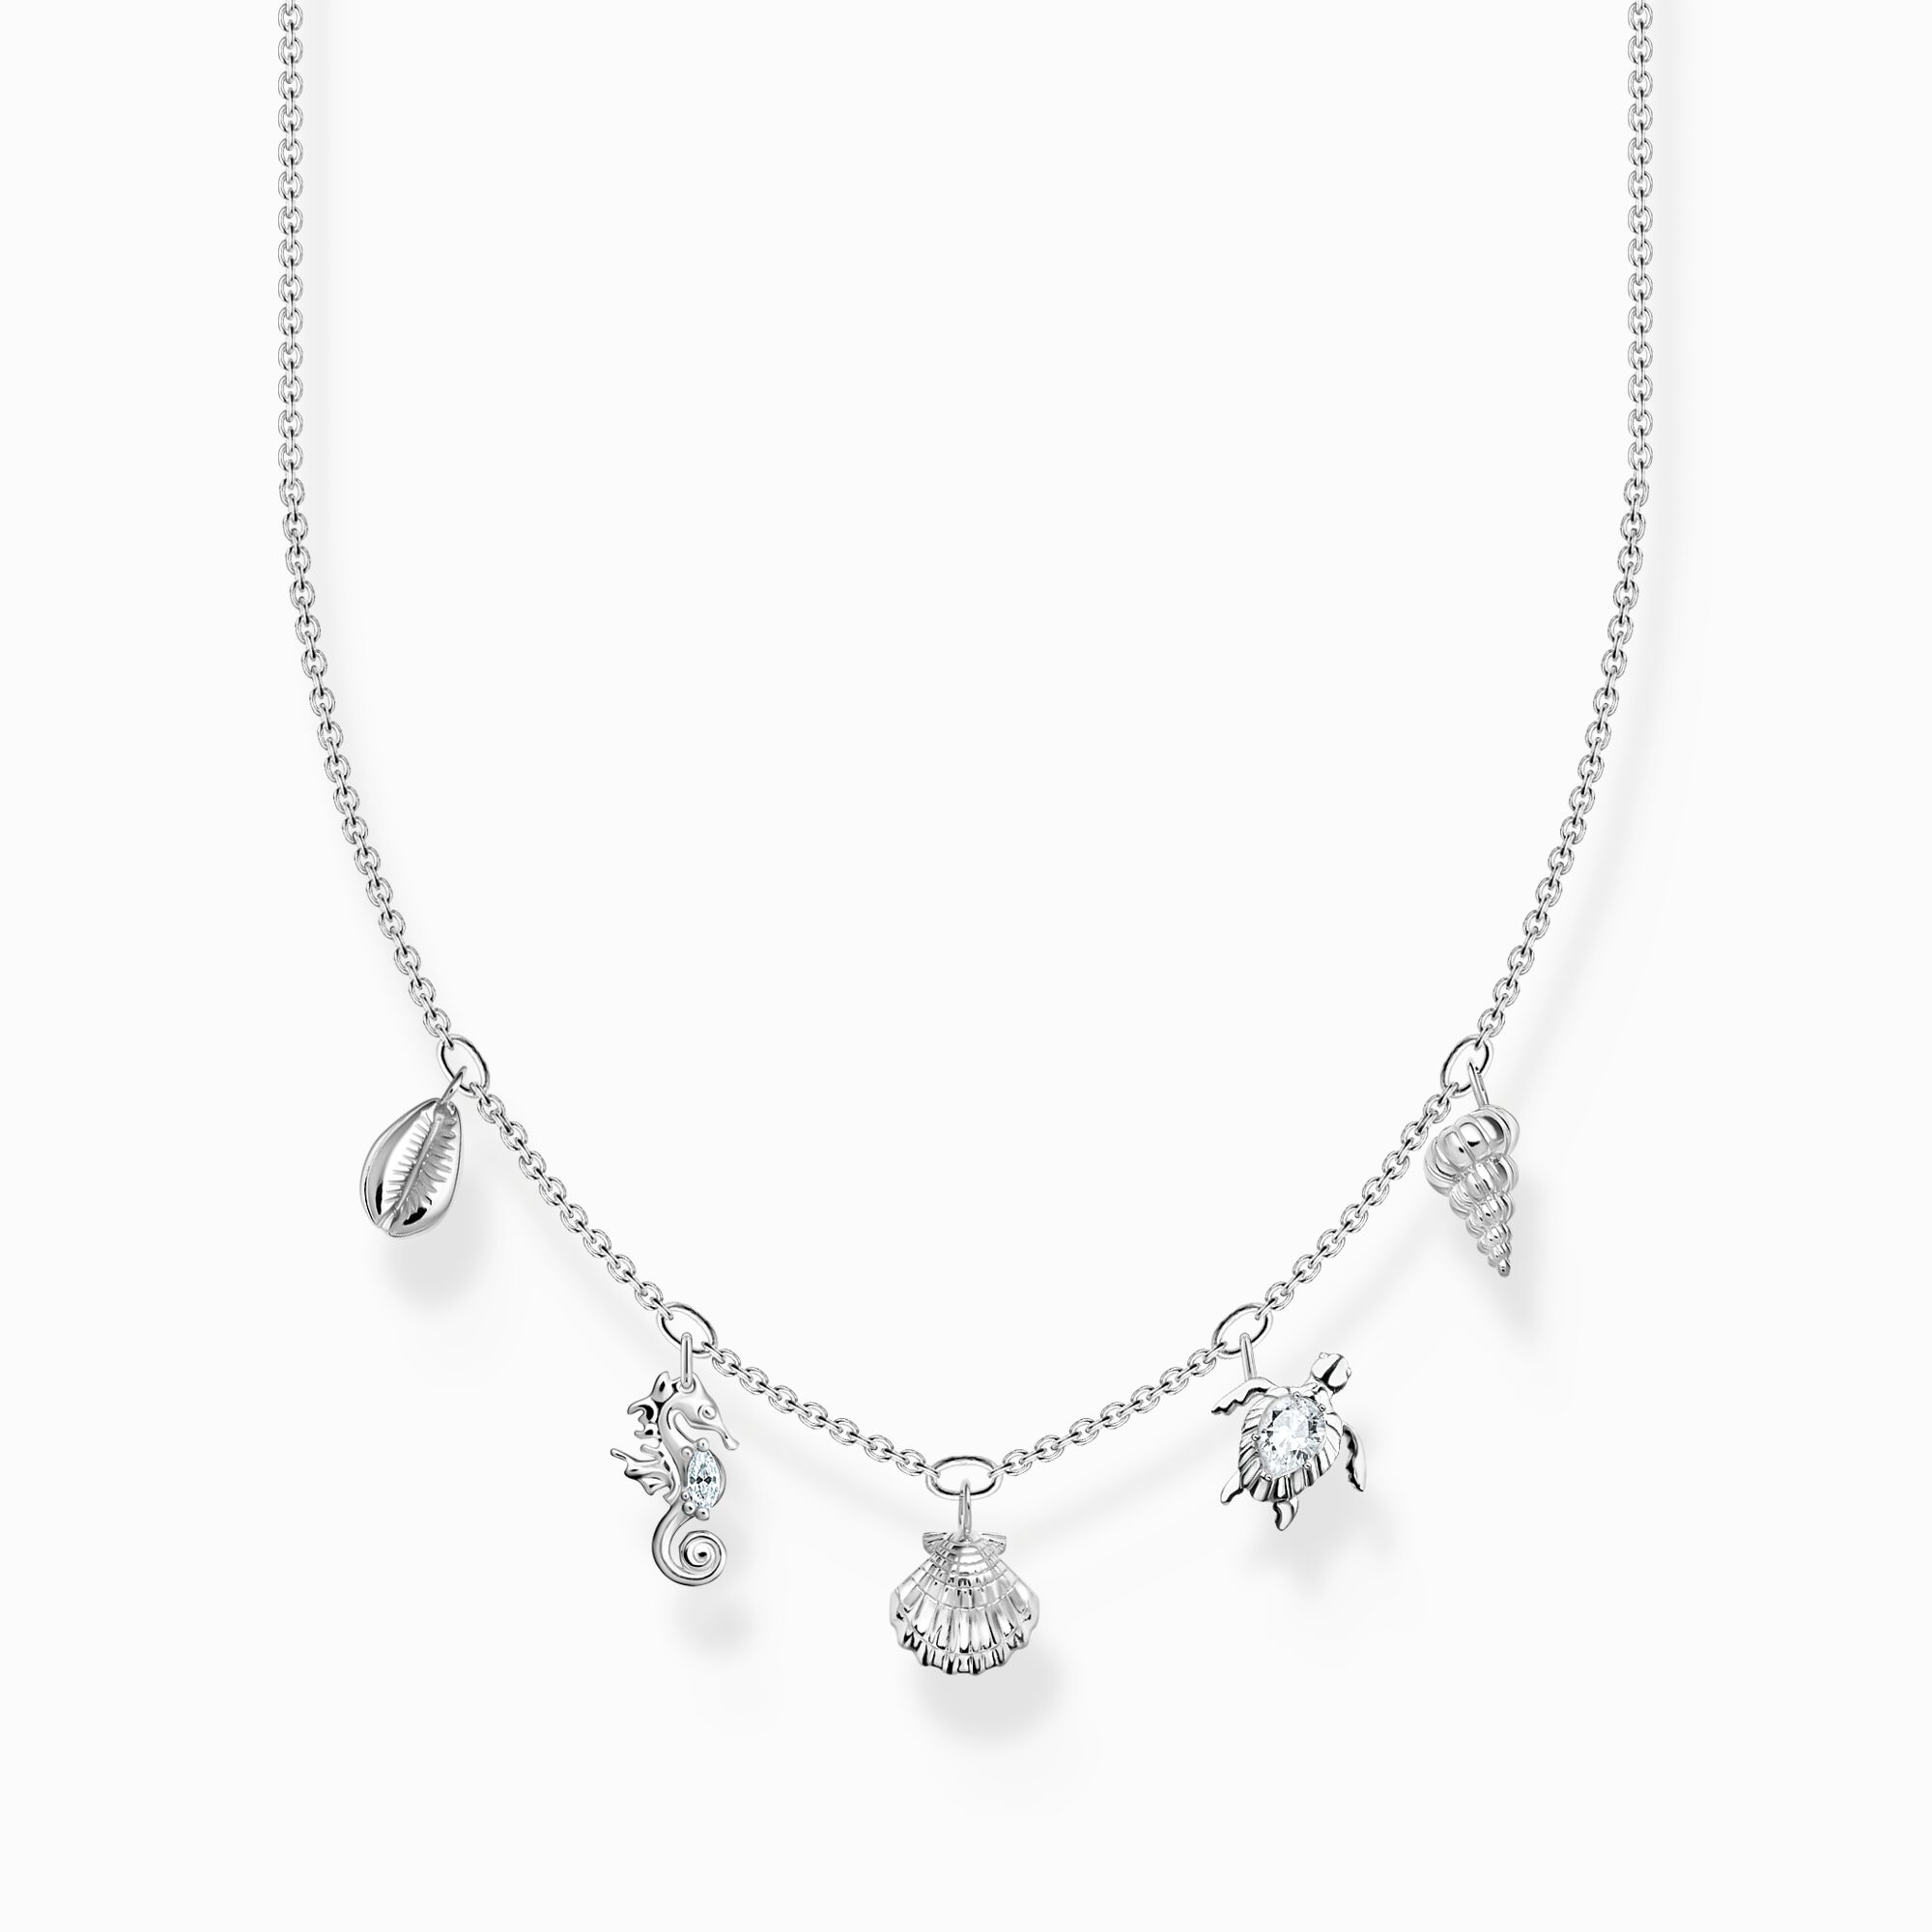 Necklace sea life silver from the Charming Collection collection in the THOMAS SABO online store